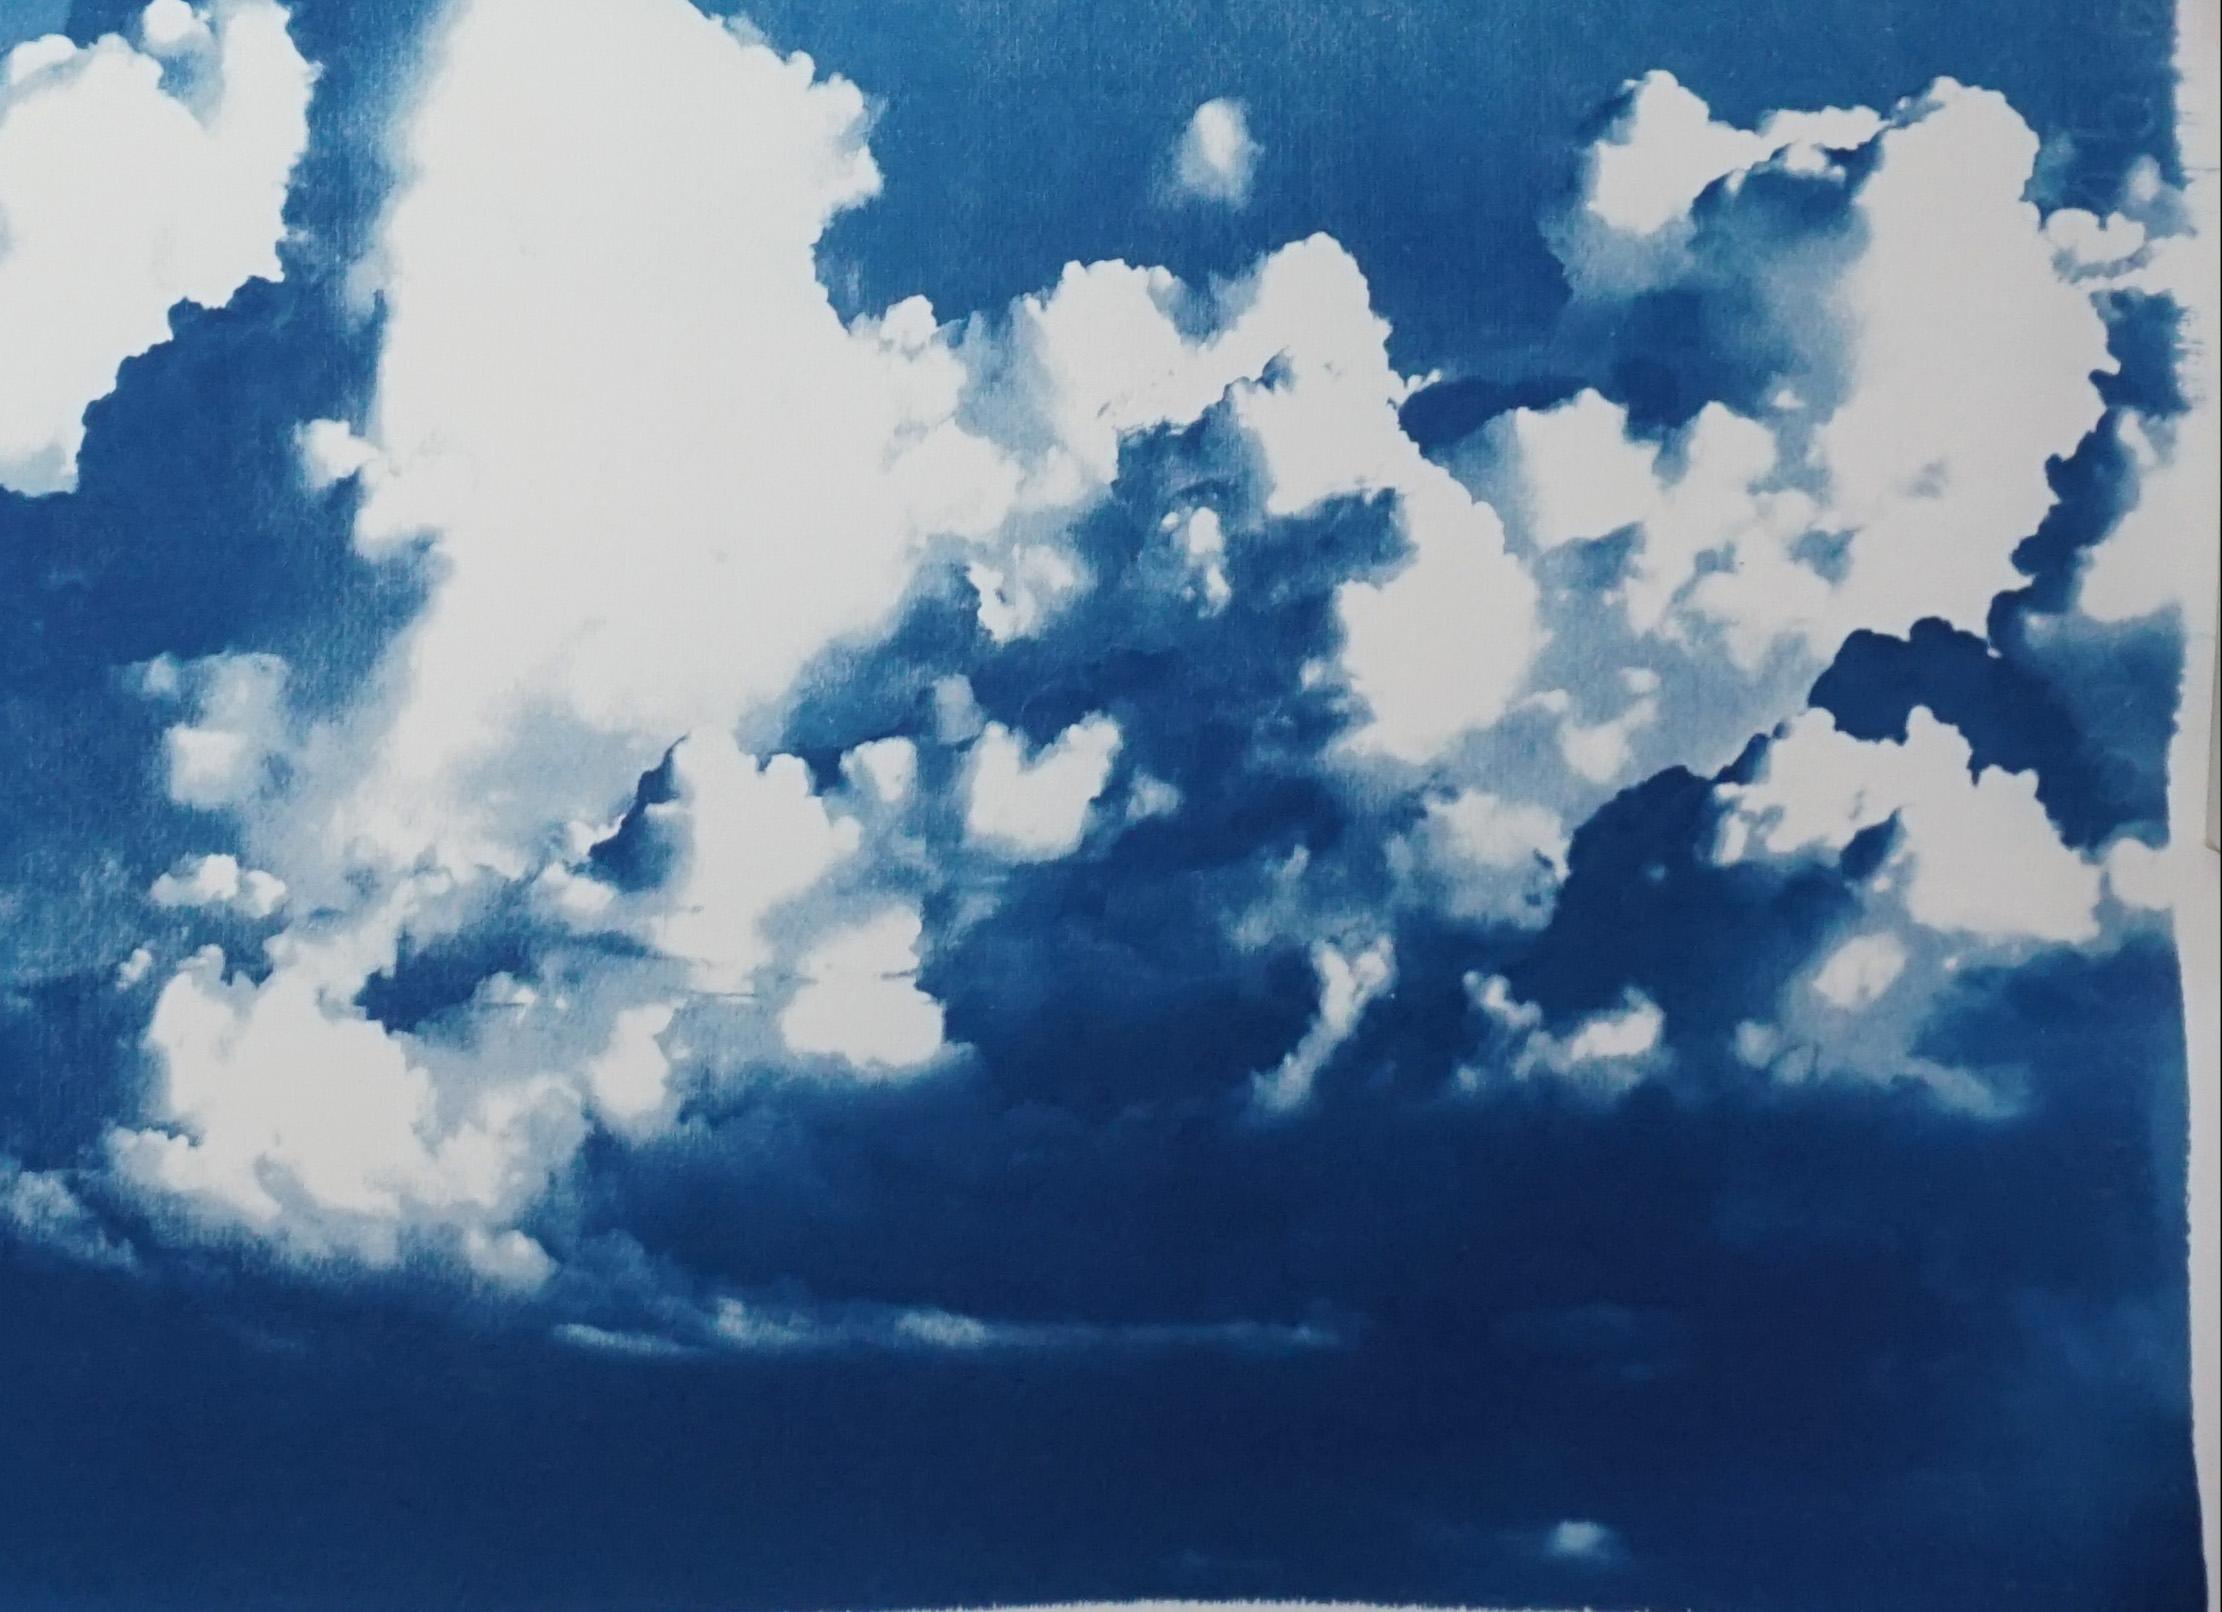 Blustery Clouds, Stormy Sky Landscape, Blue Tones, Extra Large Cyanotype, Paper - Realist Art by Kind of Cyan